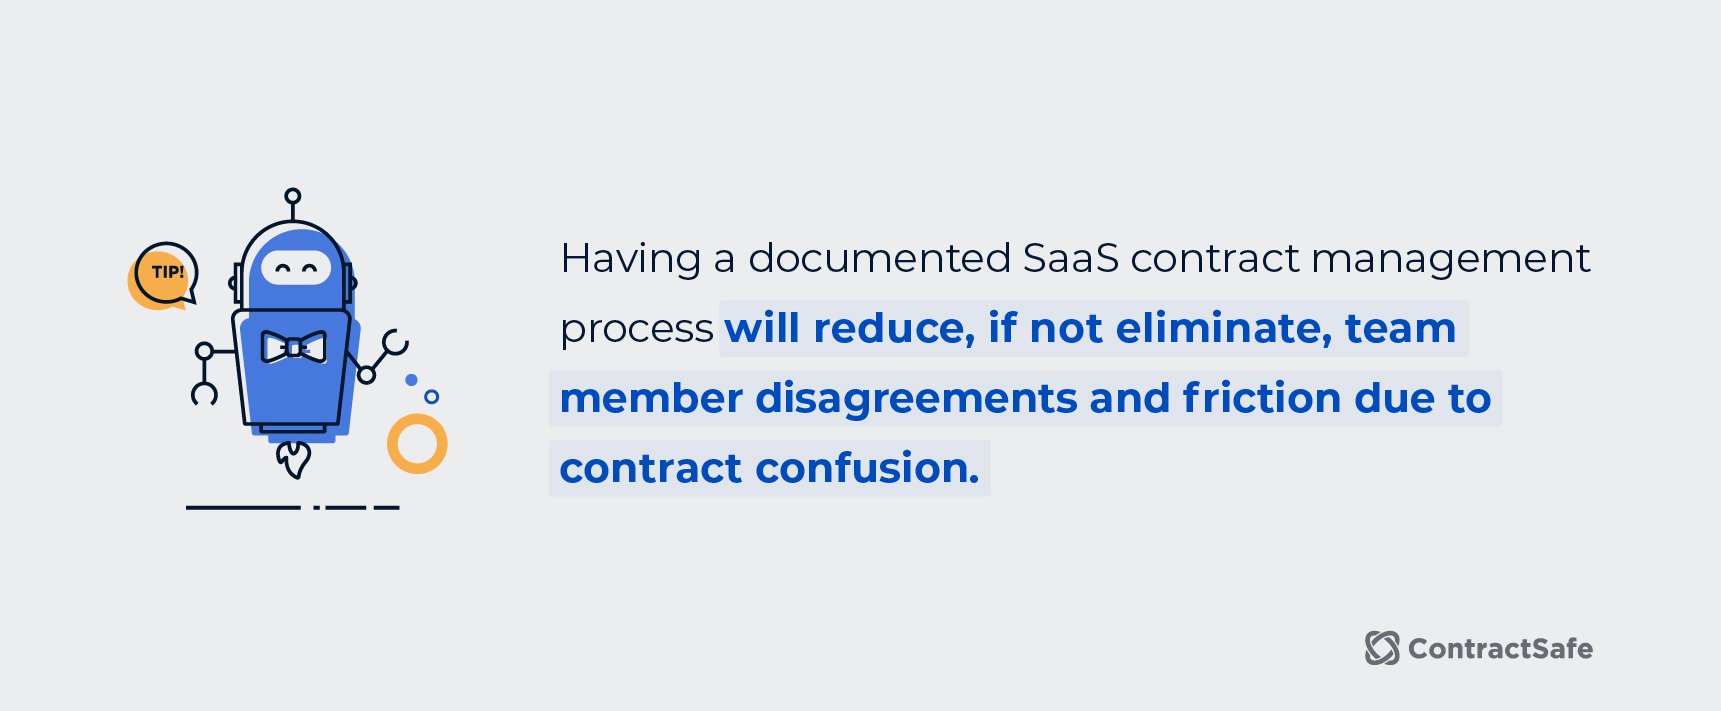 Having a documented SaaS contract management process will reduce, if not eliminate, team member disagreements and friction due to contract confusion. 